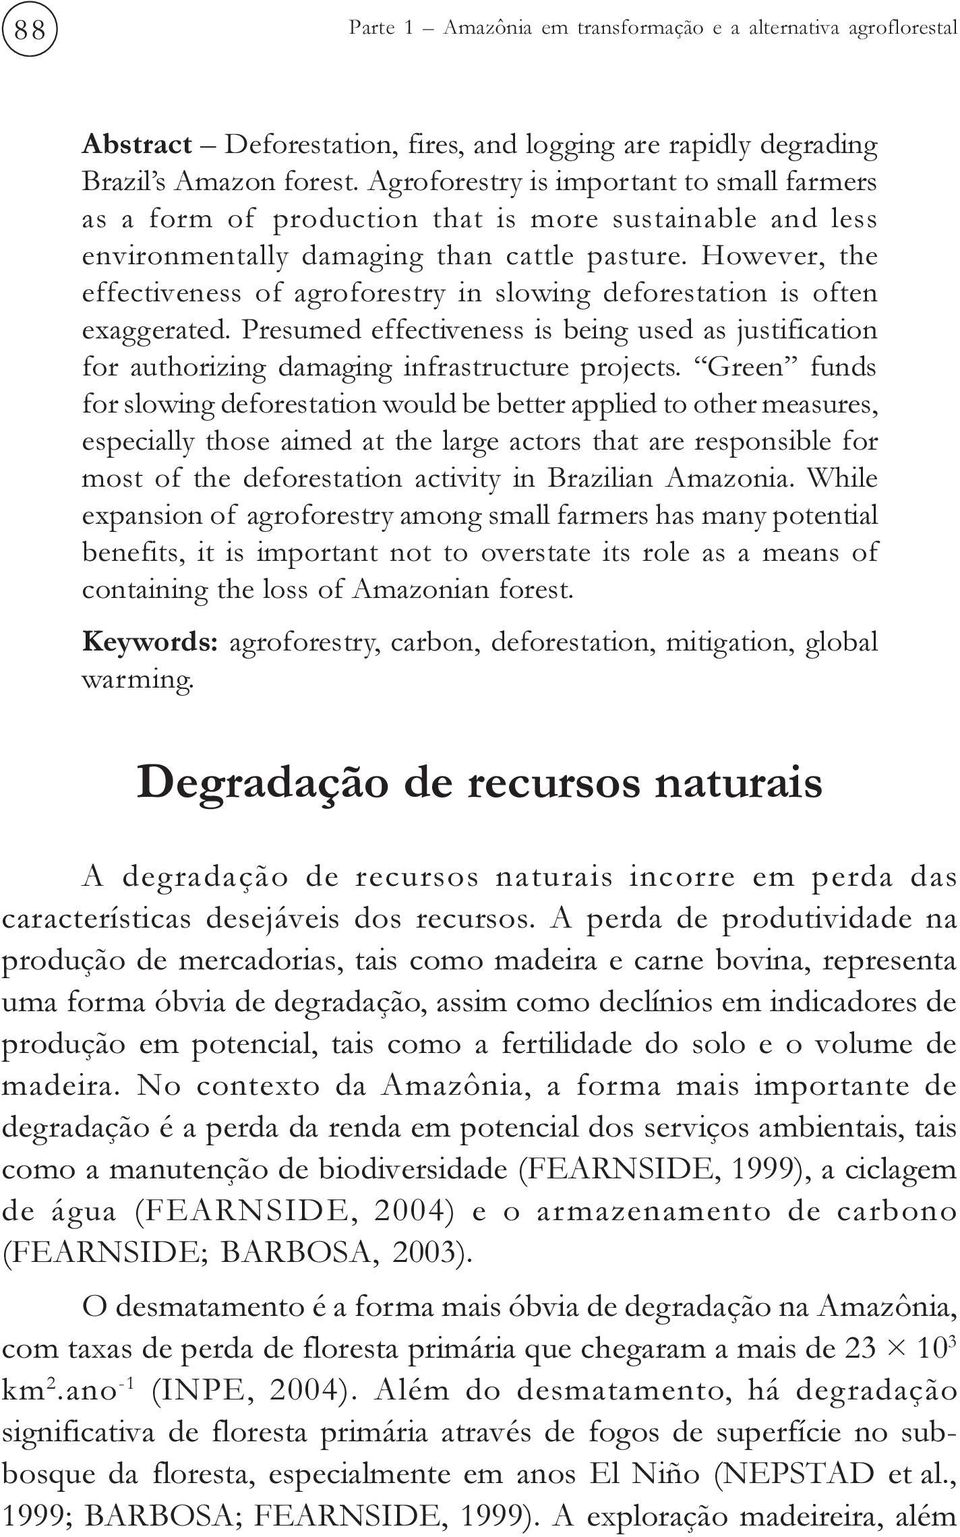 However, the effectiveness of agroforestry in slowing deforestation is often exaggerated. Presumed effectiveness is being used as justification for authorizing damaging infrastructure projects.